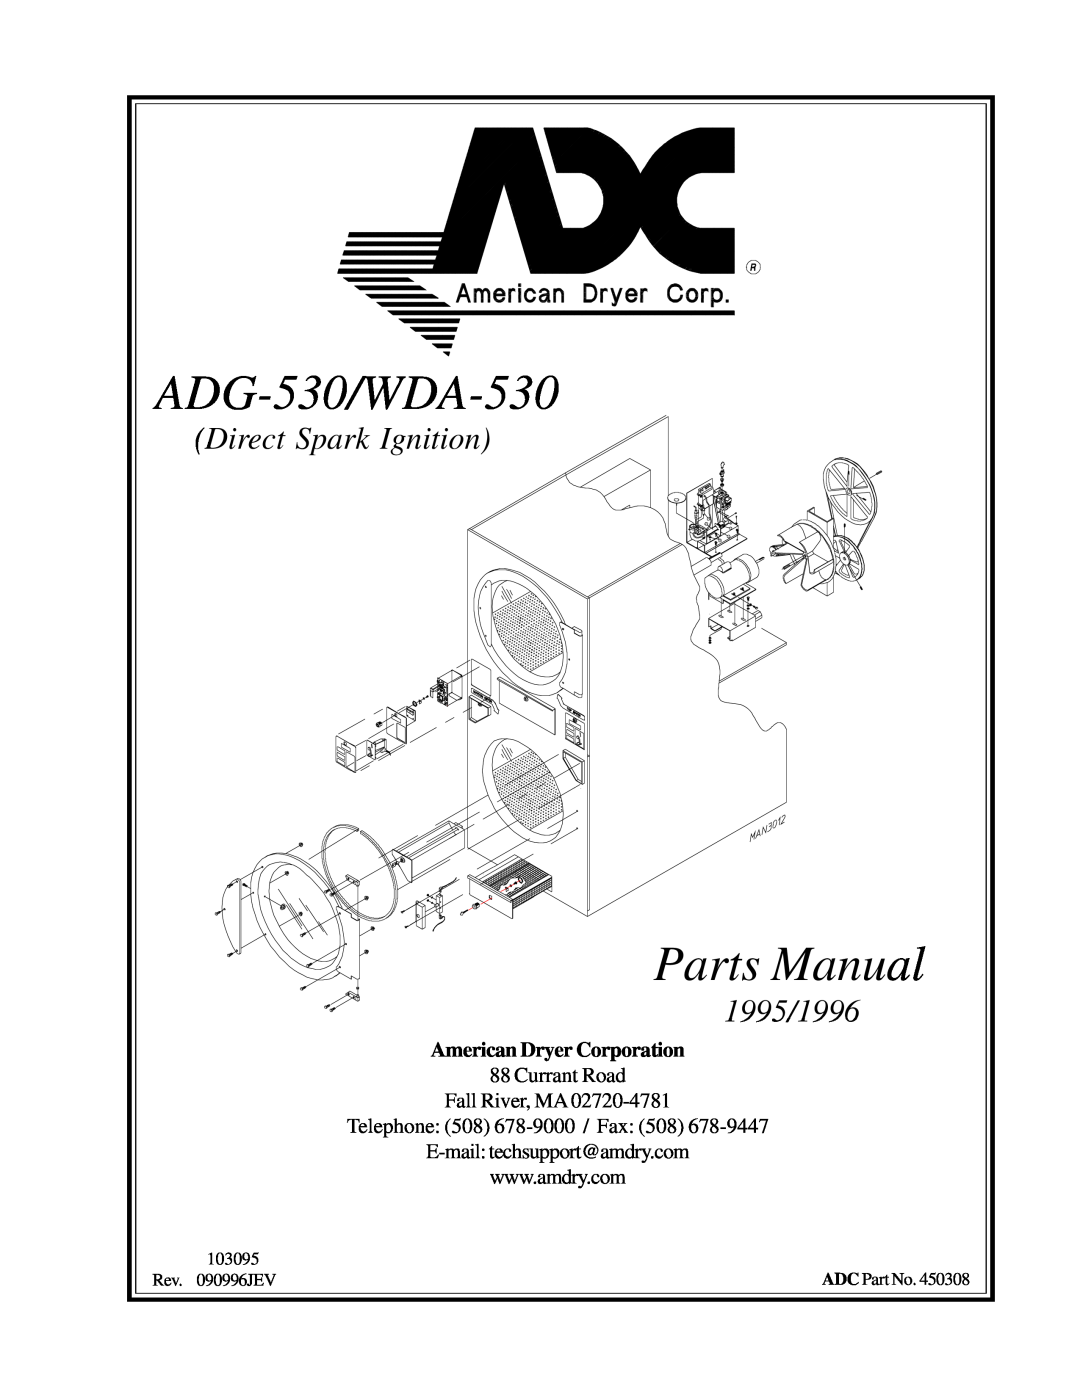 American Dryer Corp manual American Dryer Corporation, ADG-530/WDA-530, Parts Manual, Direct Spark Ignition, 1995/1996 